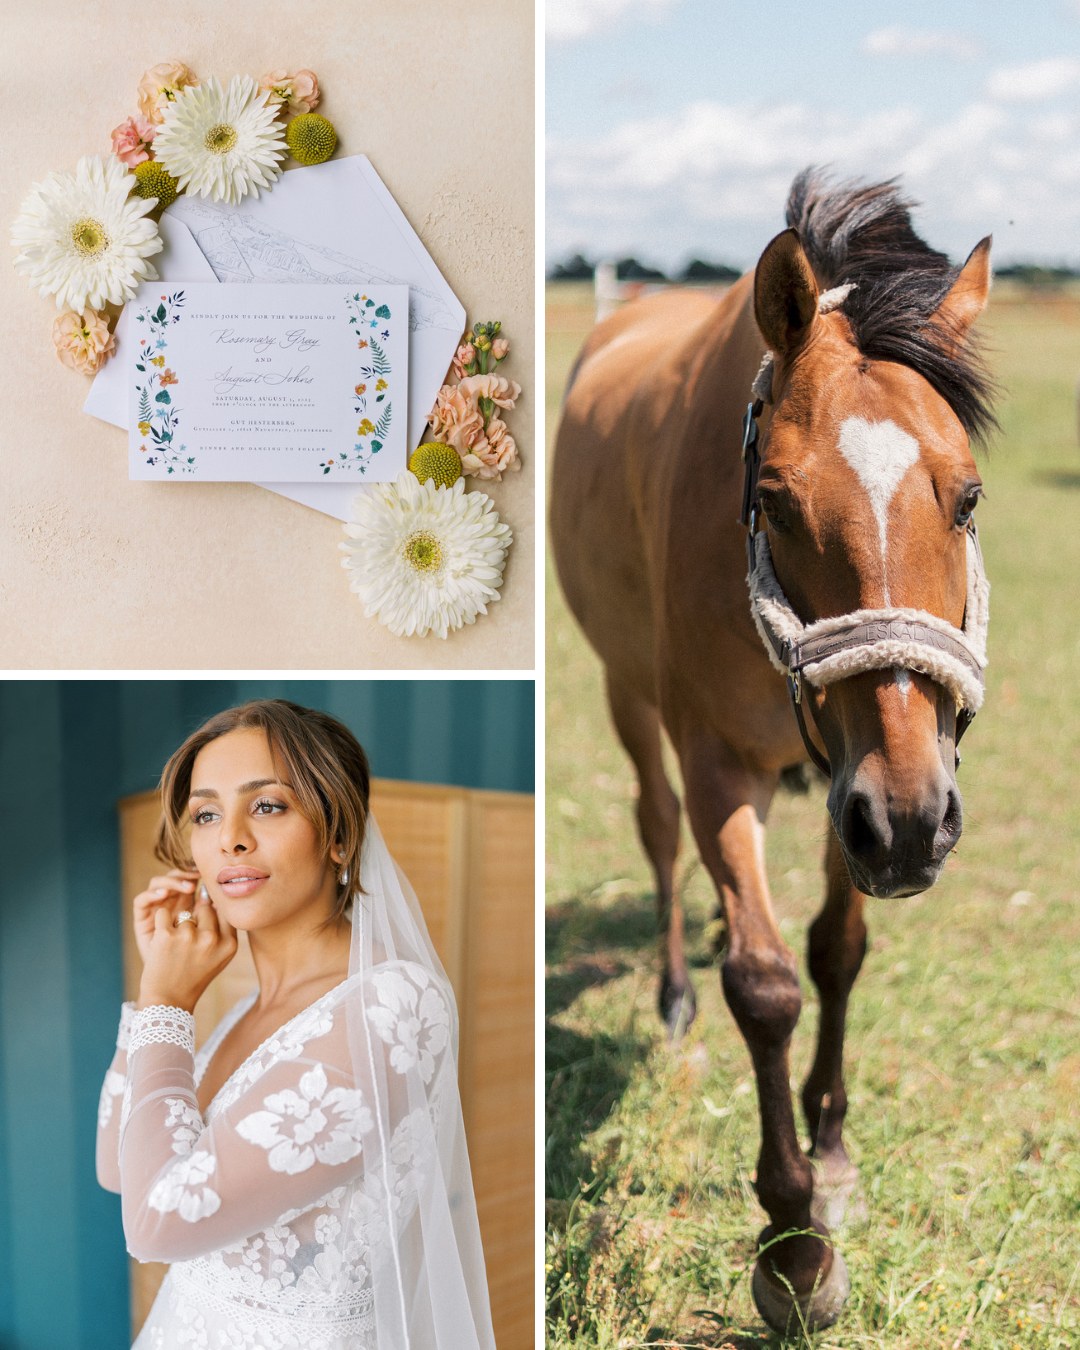 Collage of a horse, a bride and wedding invitations